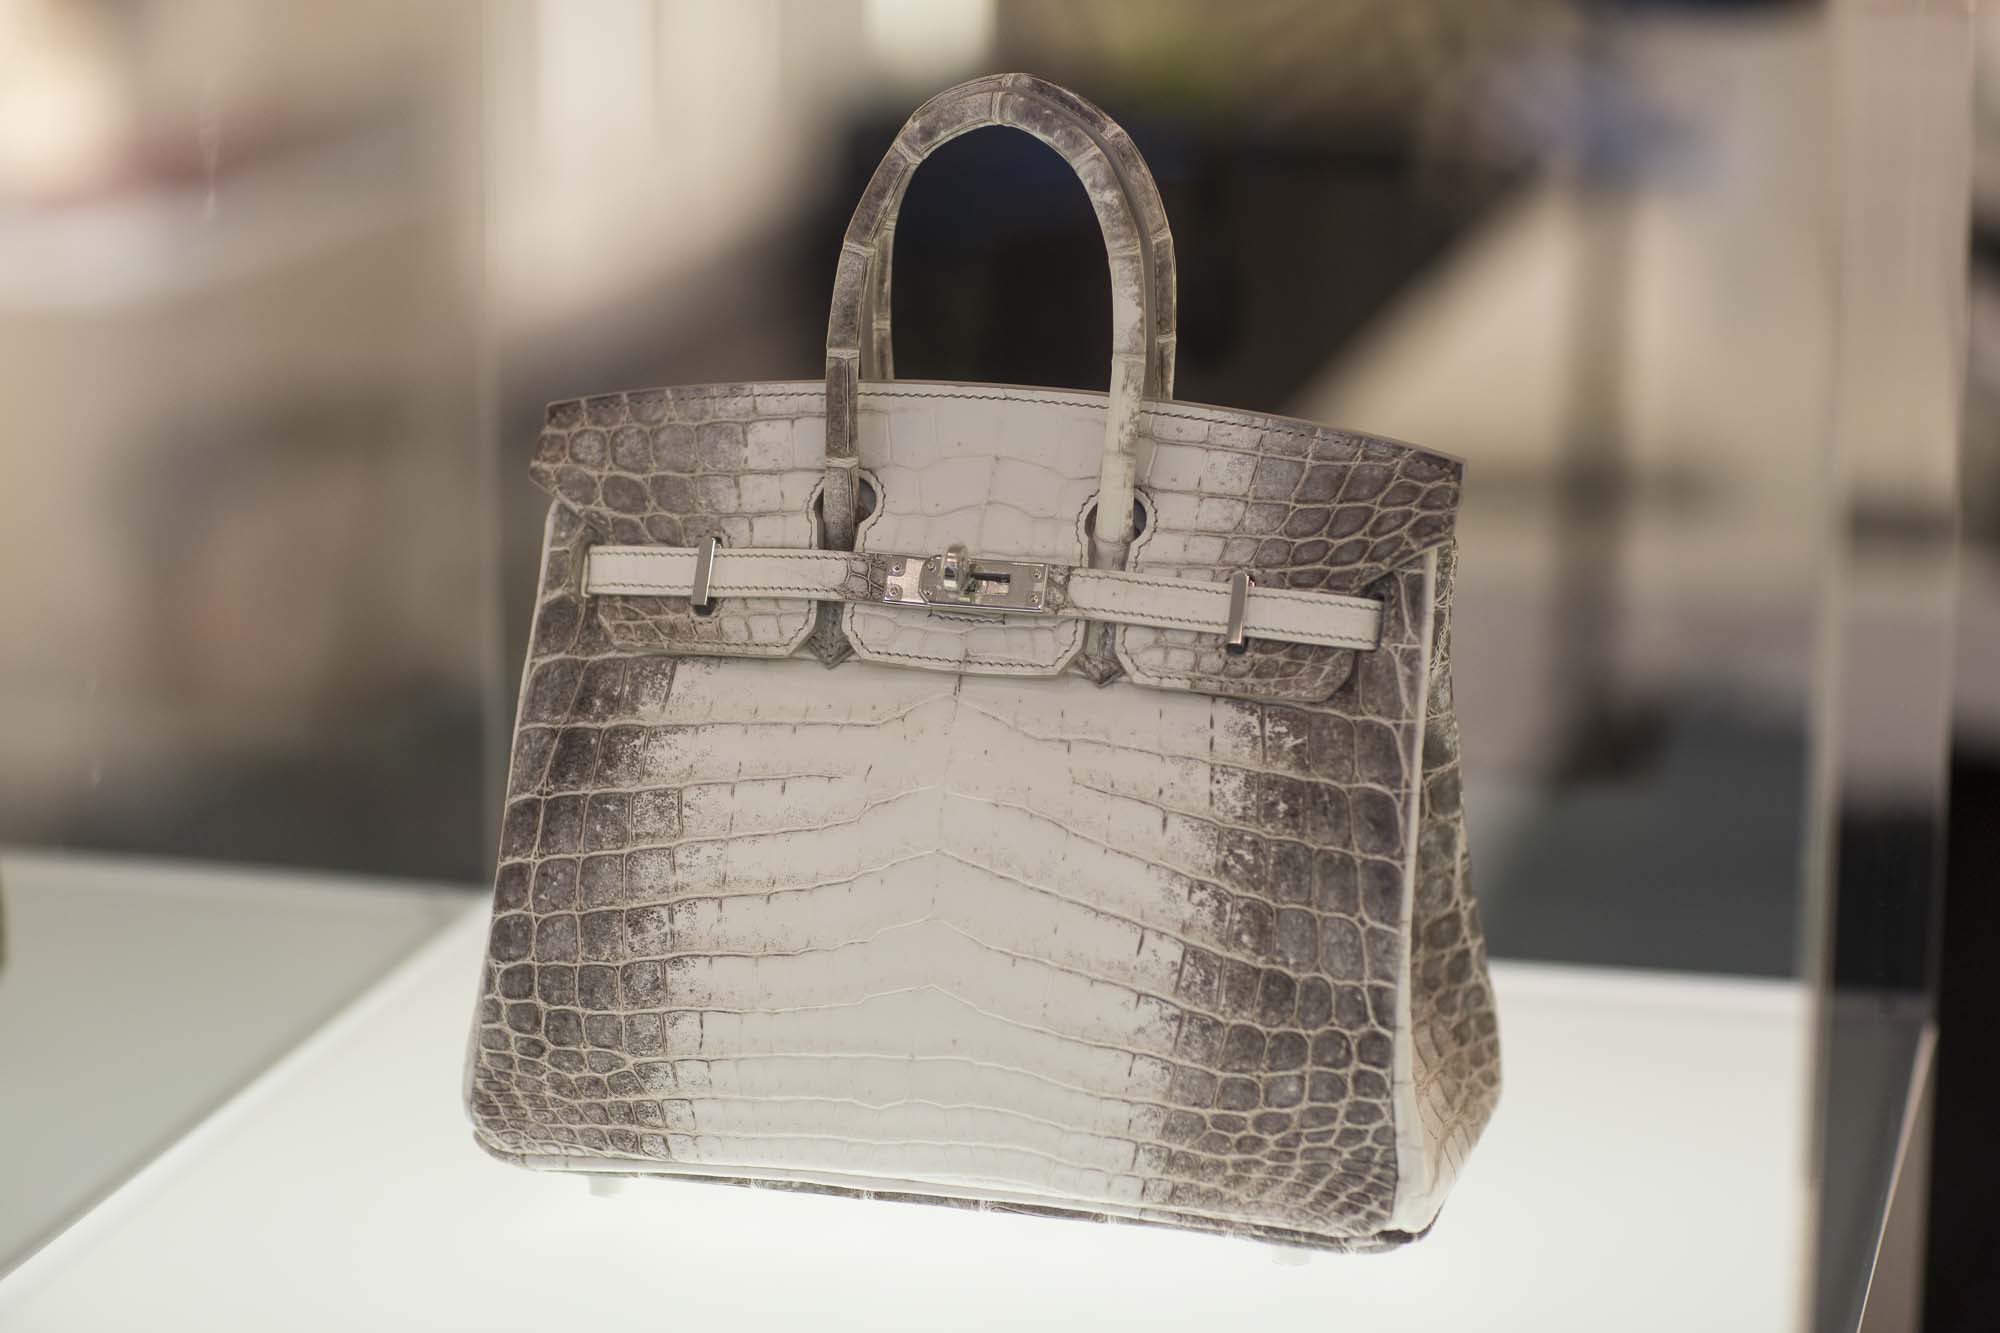 That Birkin Bag May Be More Obtainable Than You Think